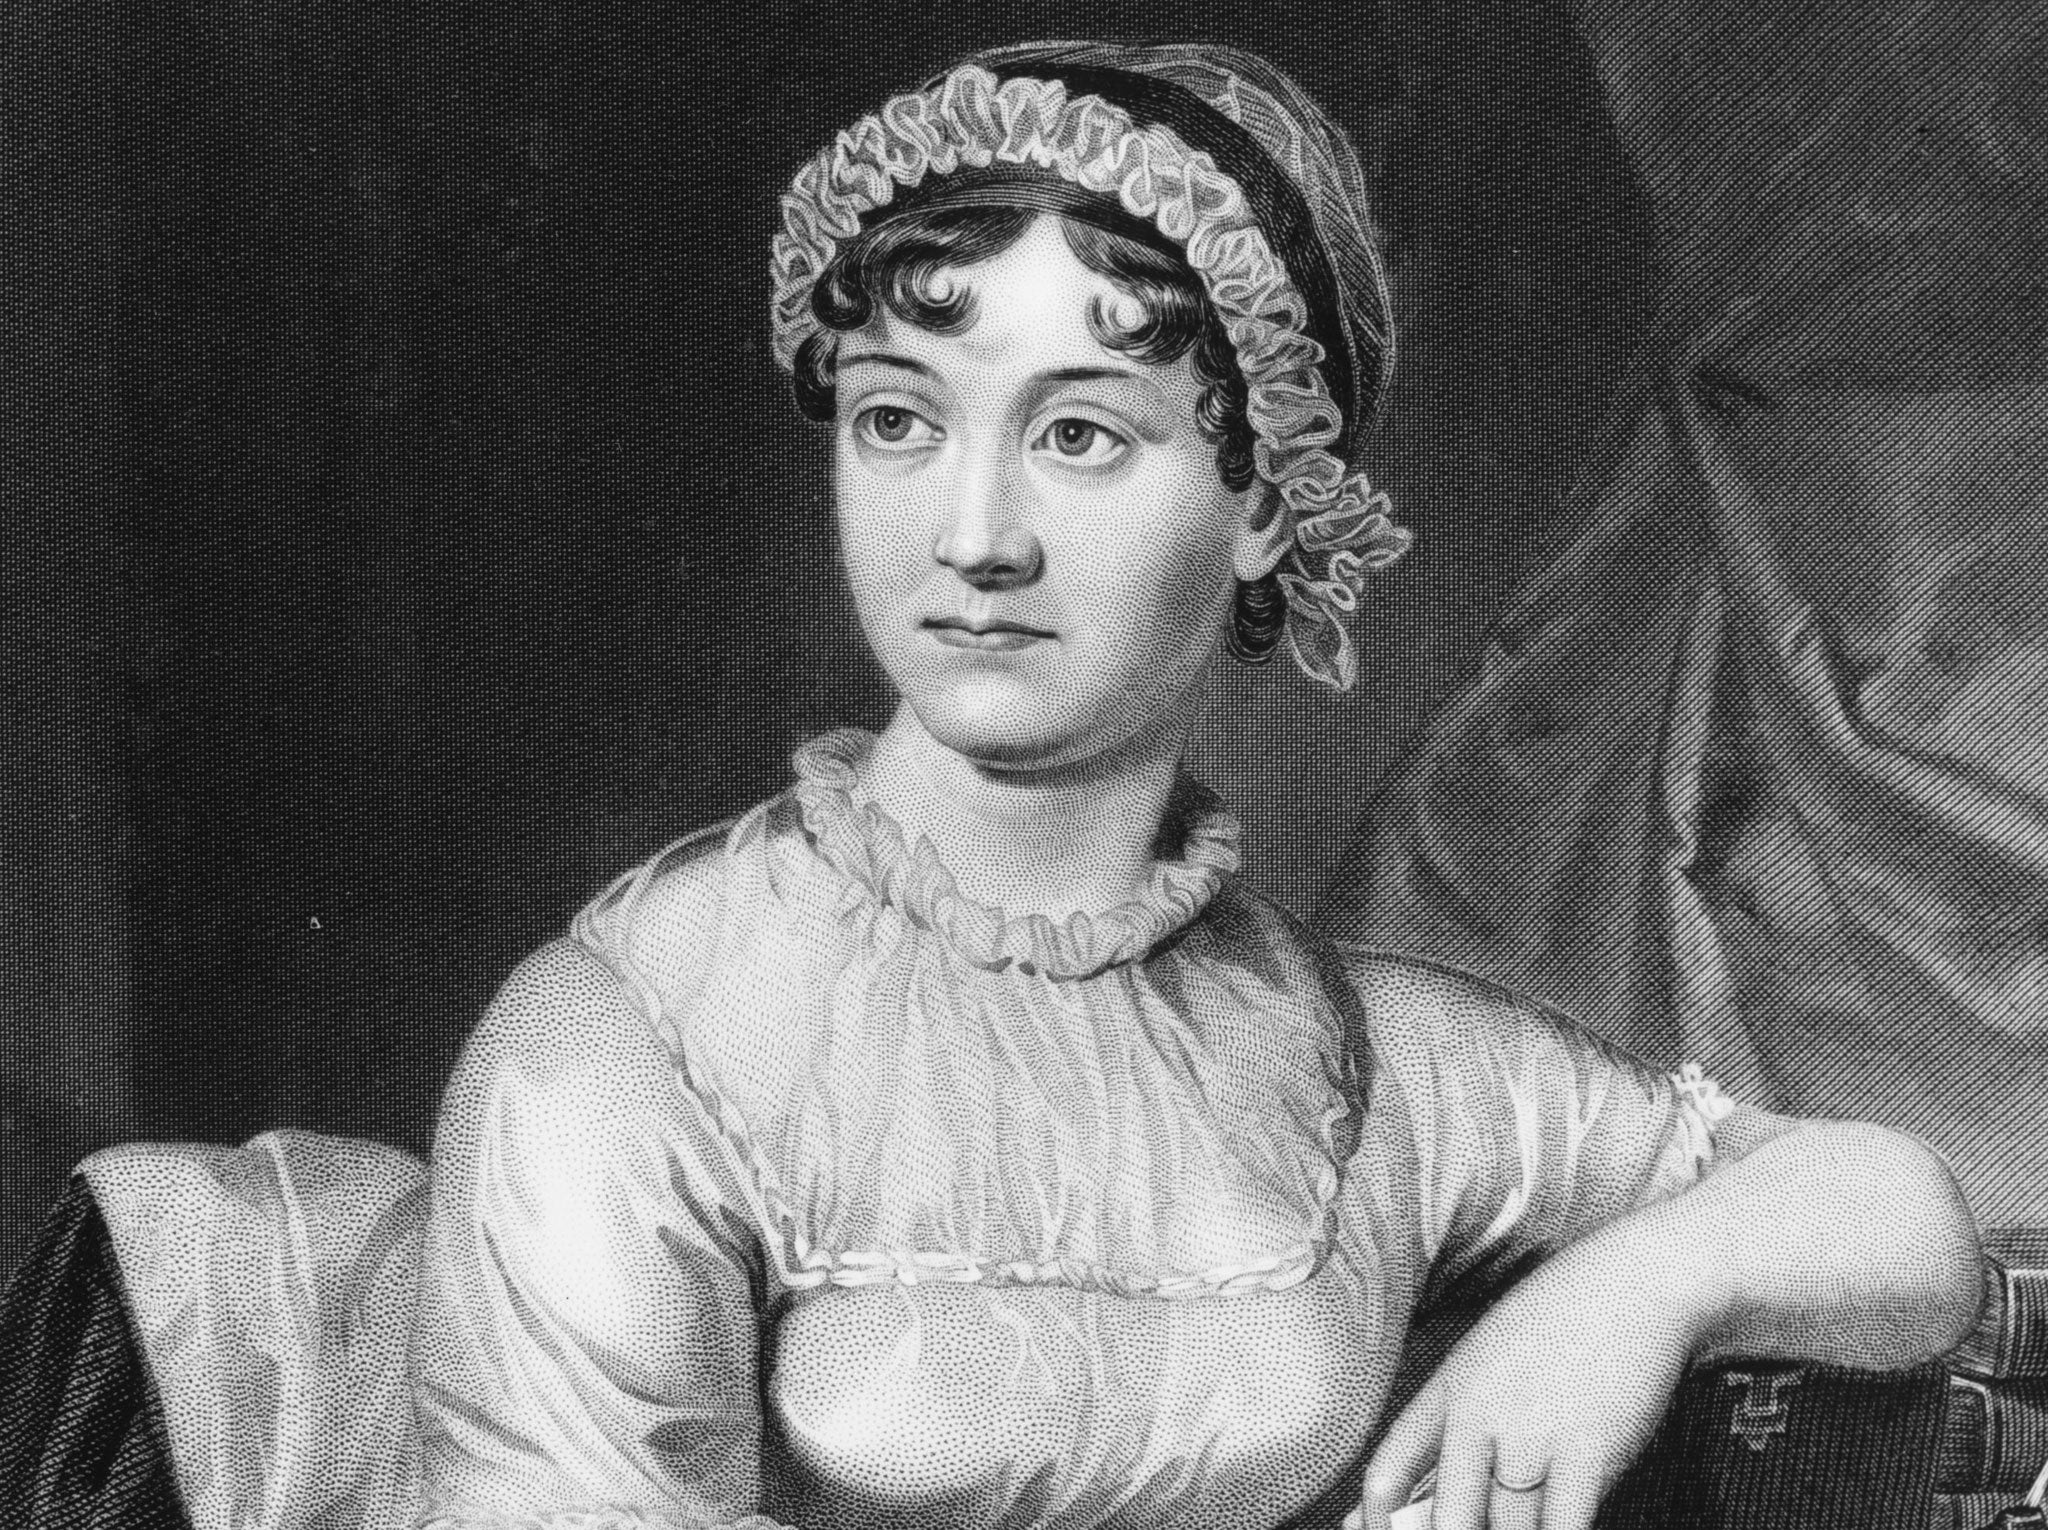 English novelist Jane Austen from an original family portrait. (Photo by Hulton Archive/Getty Images)